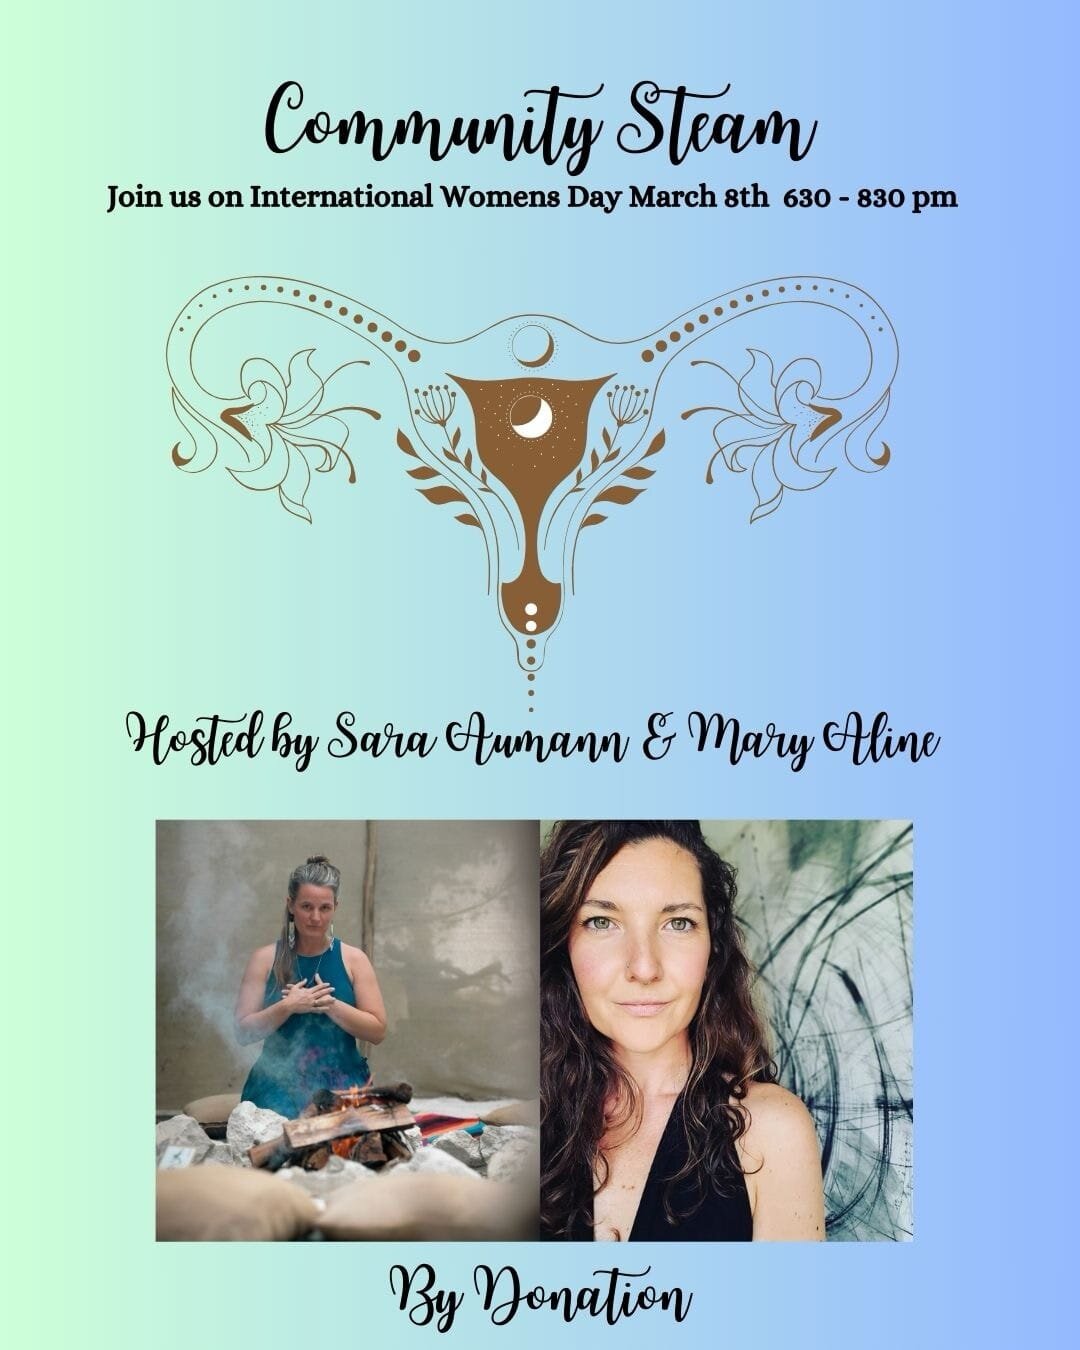 Colorado FAM! I'm back after 7 months of traipsing around (and being a boss babe 🤓) and I want to see yall! Especially my ladies! 

Come steam with me and my dearest Sara J. Aumann this Friday. By donation. 
If you ever wanted to explore yoni steami